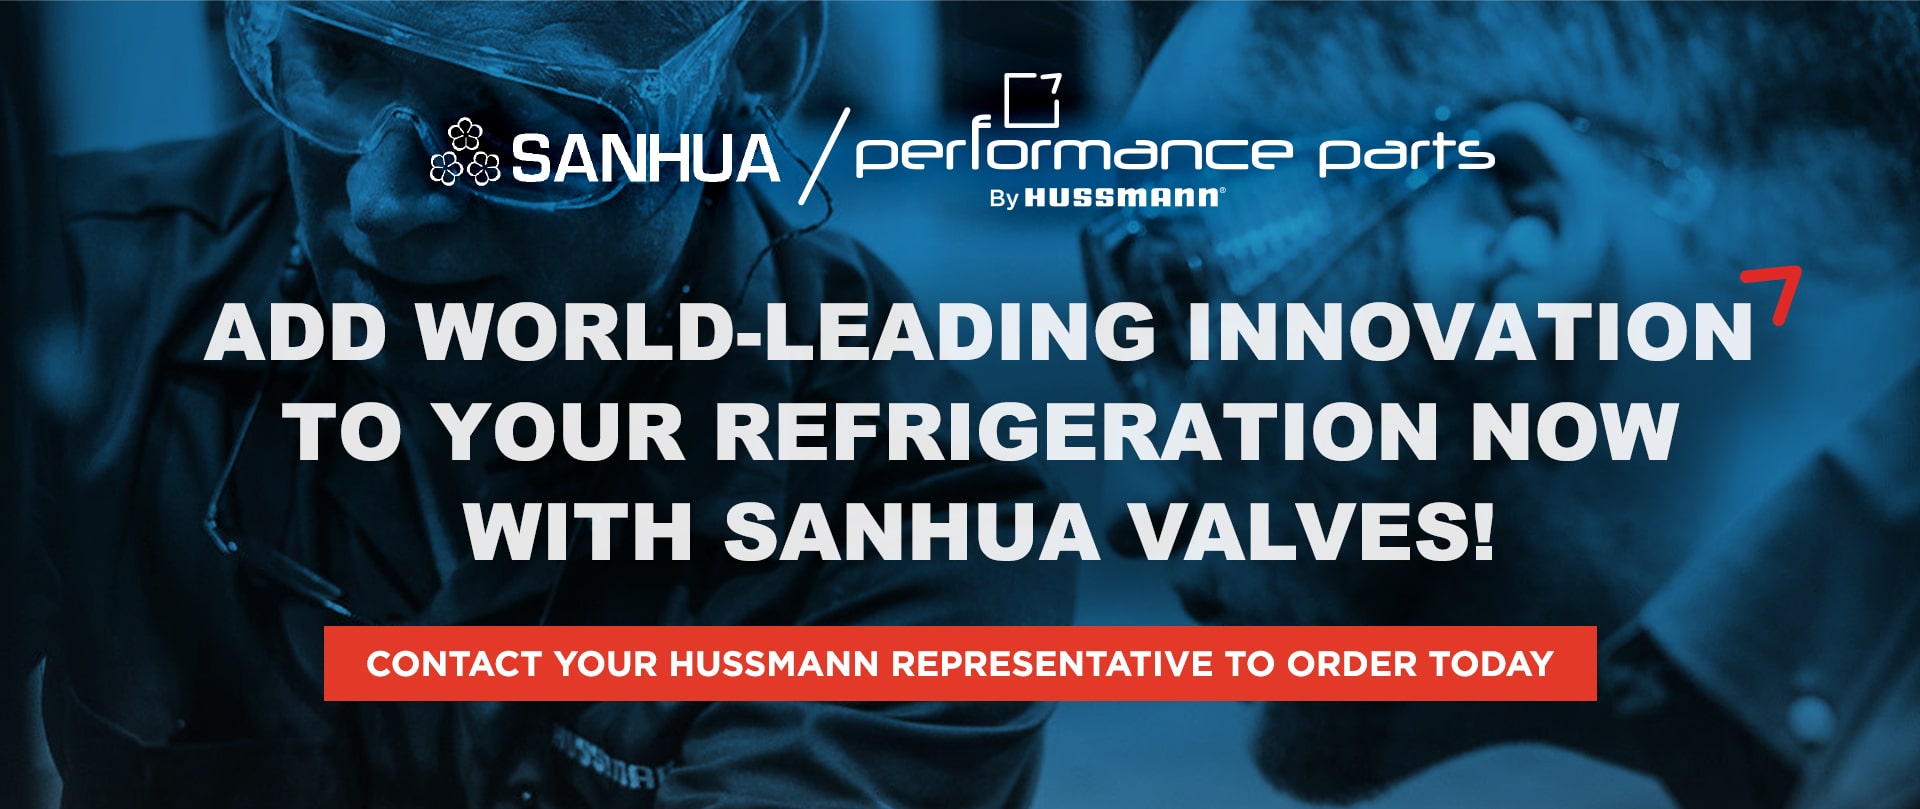 Add World-Leading Innovation To Your Refrigeration With Sanhua Valves